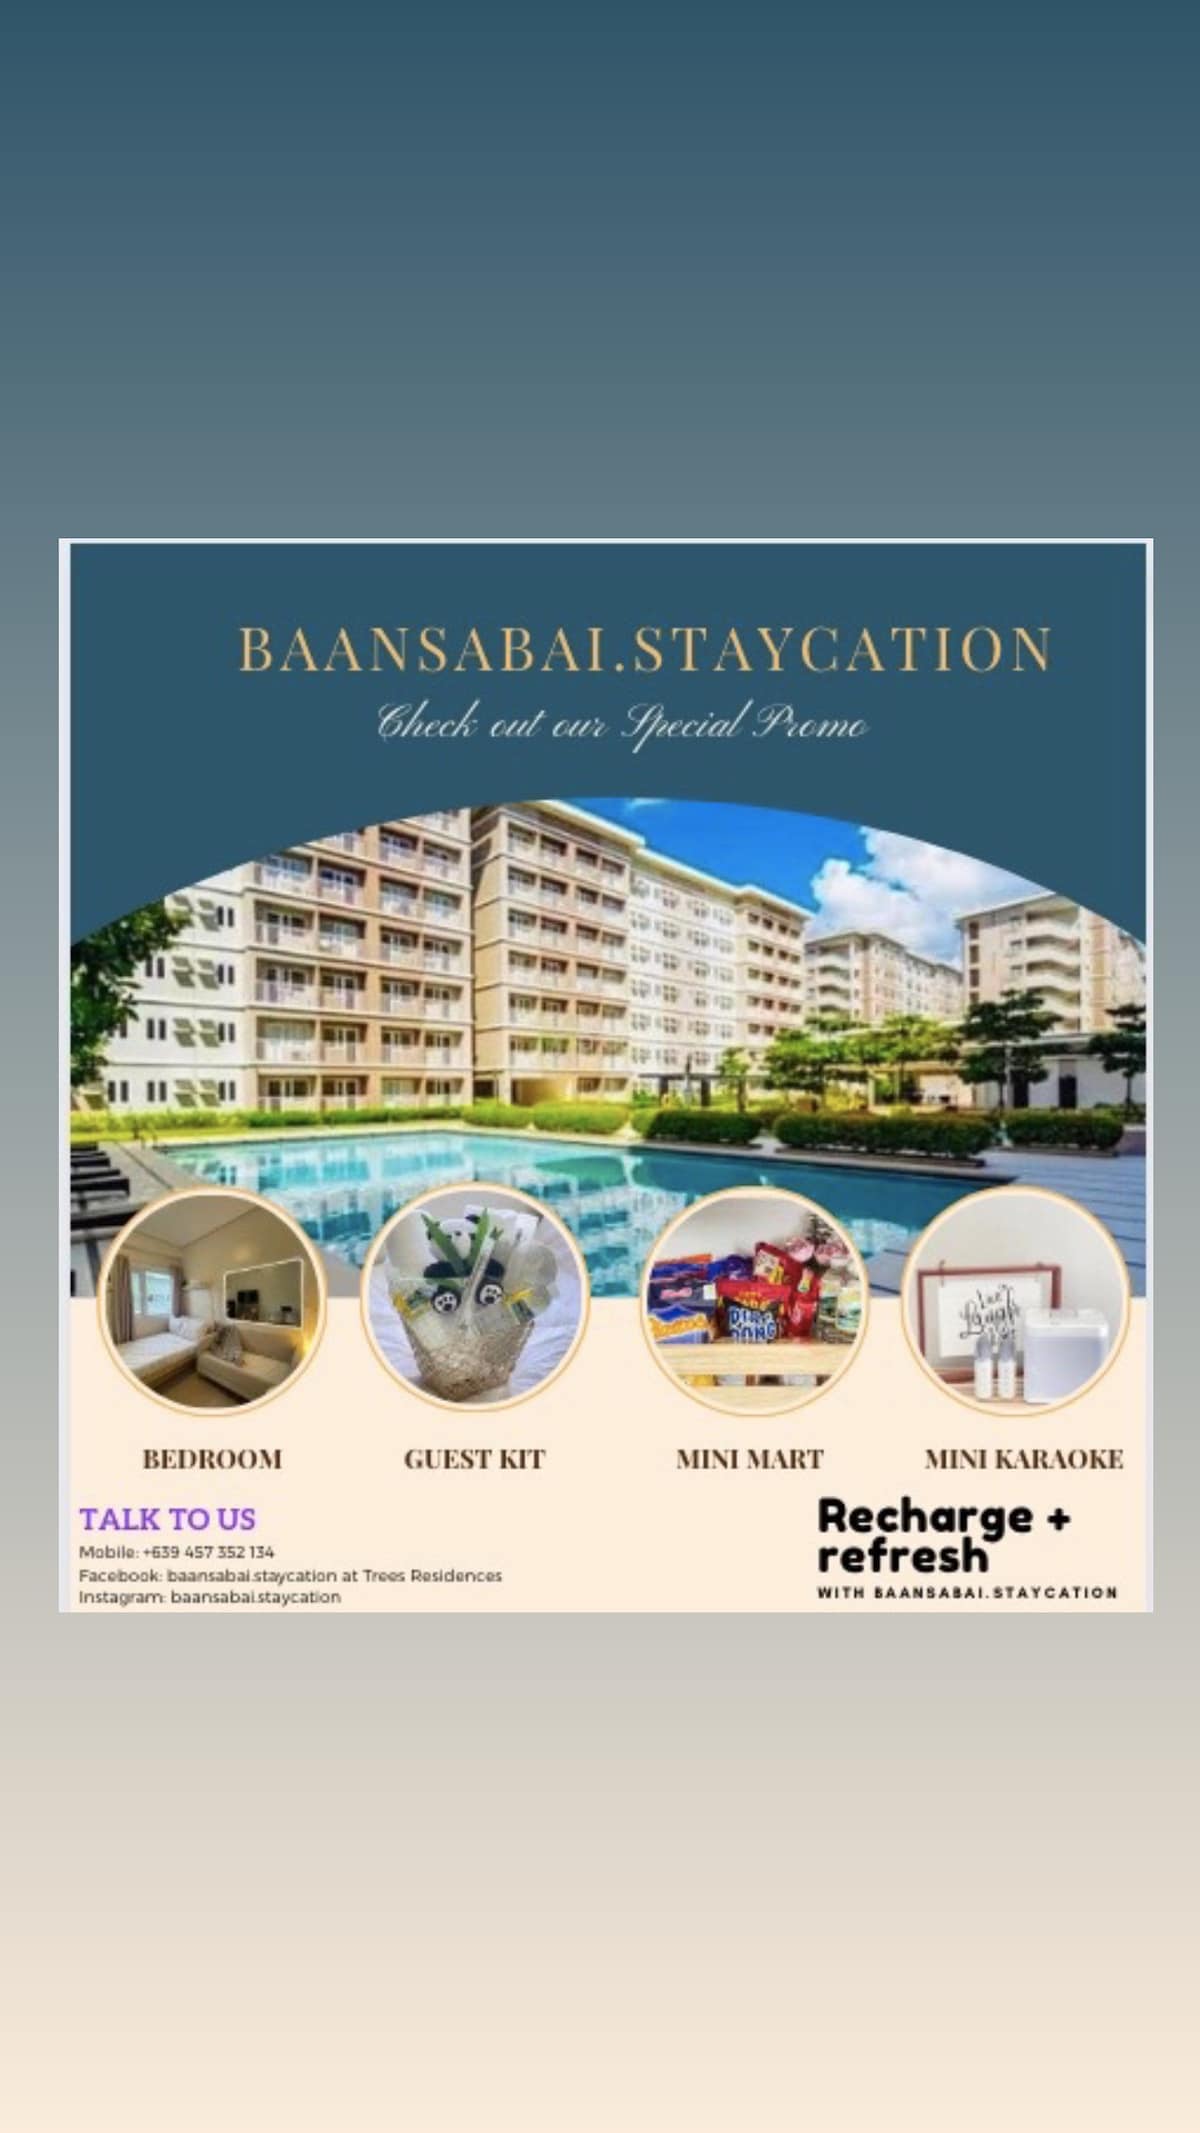 Baansabai.staycation at Trees Residences